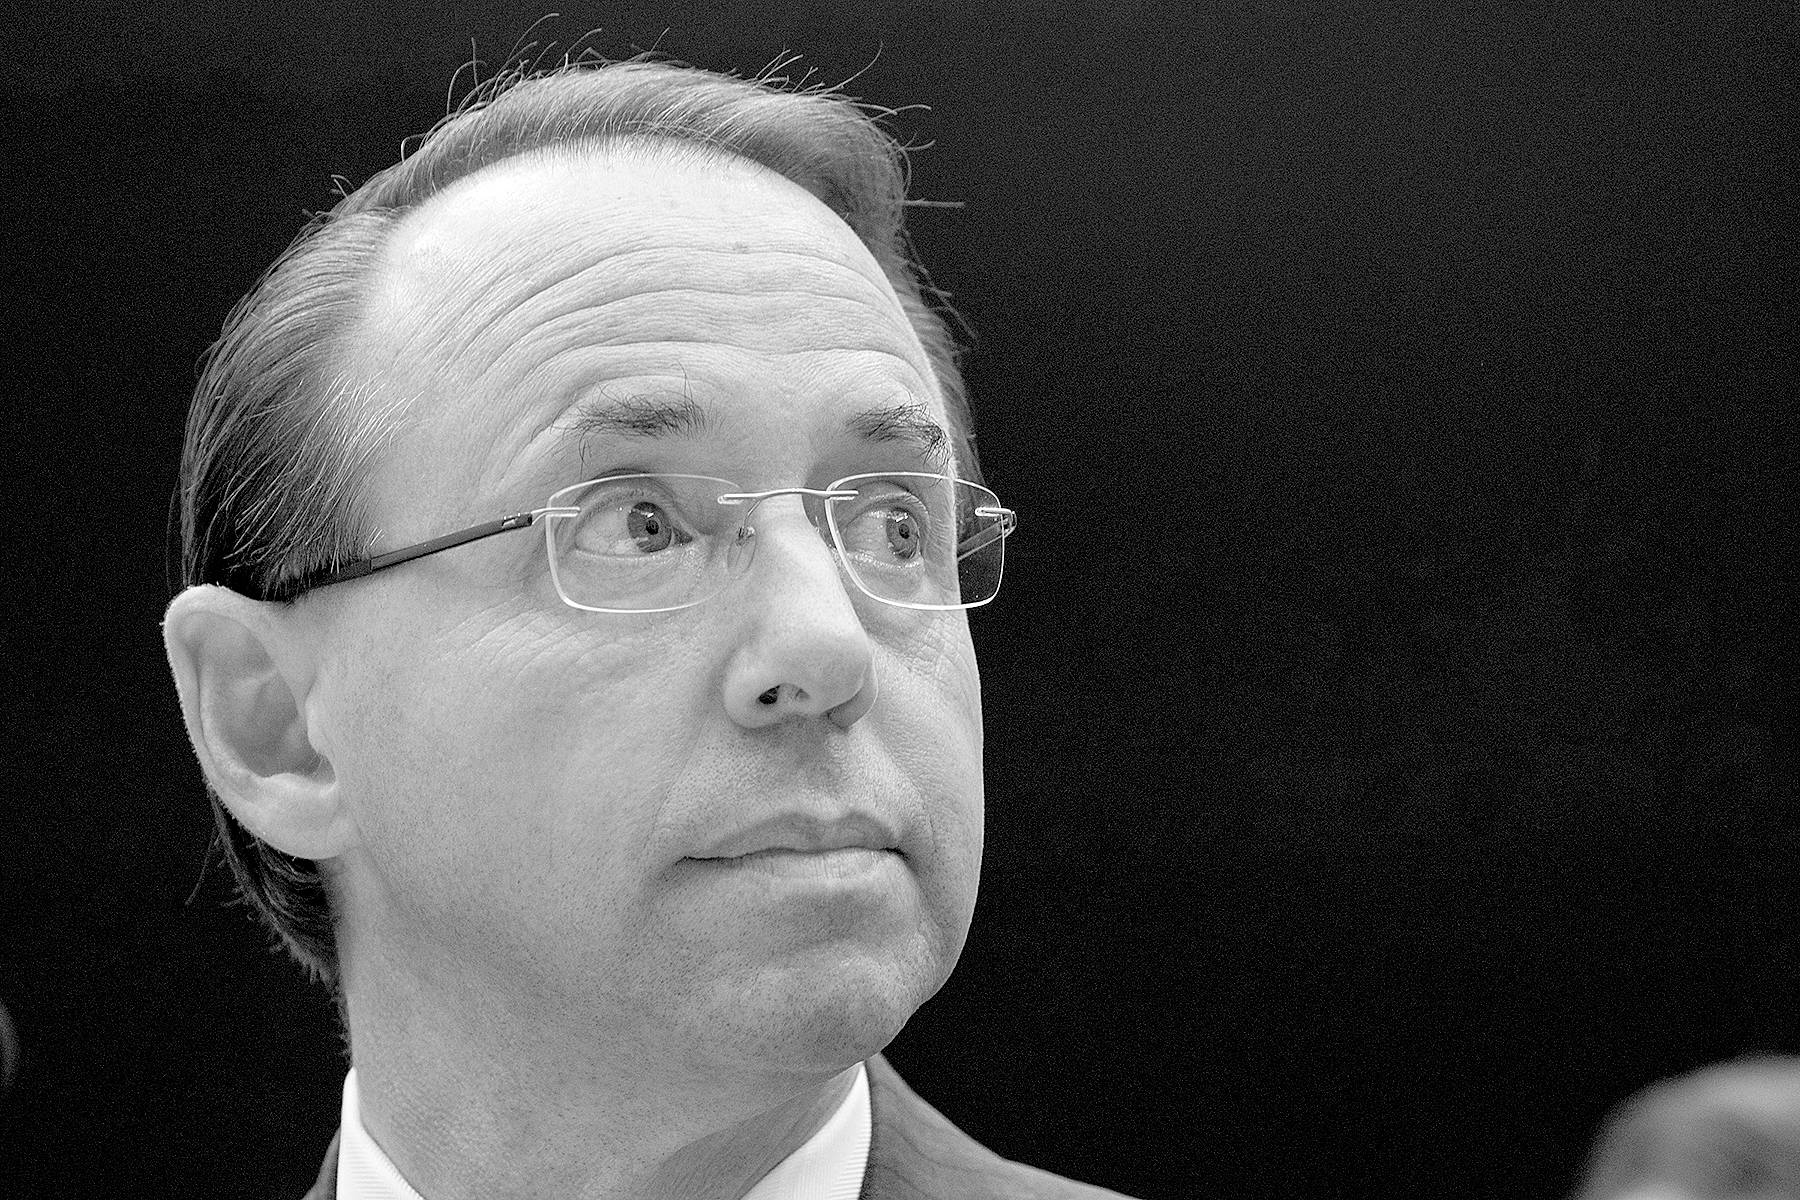 Rosenstein to meet Trump amid reports he is resigning